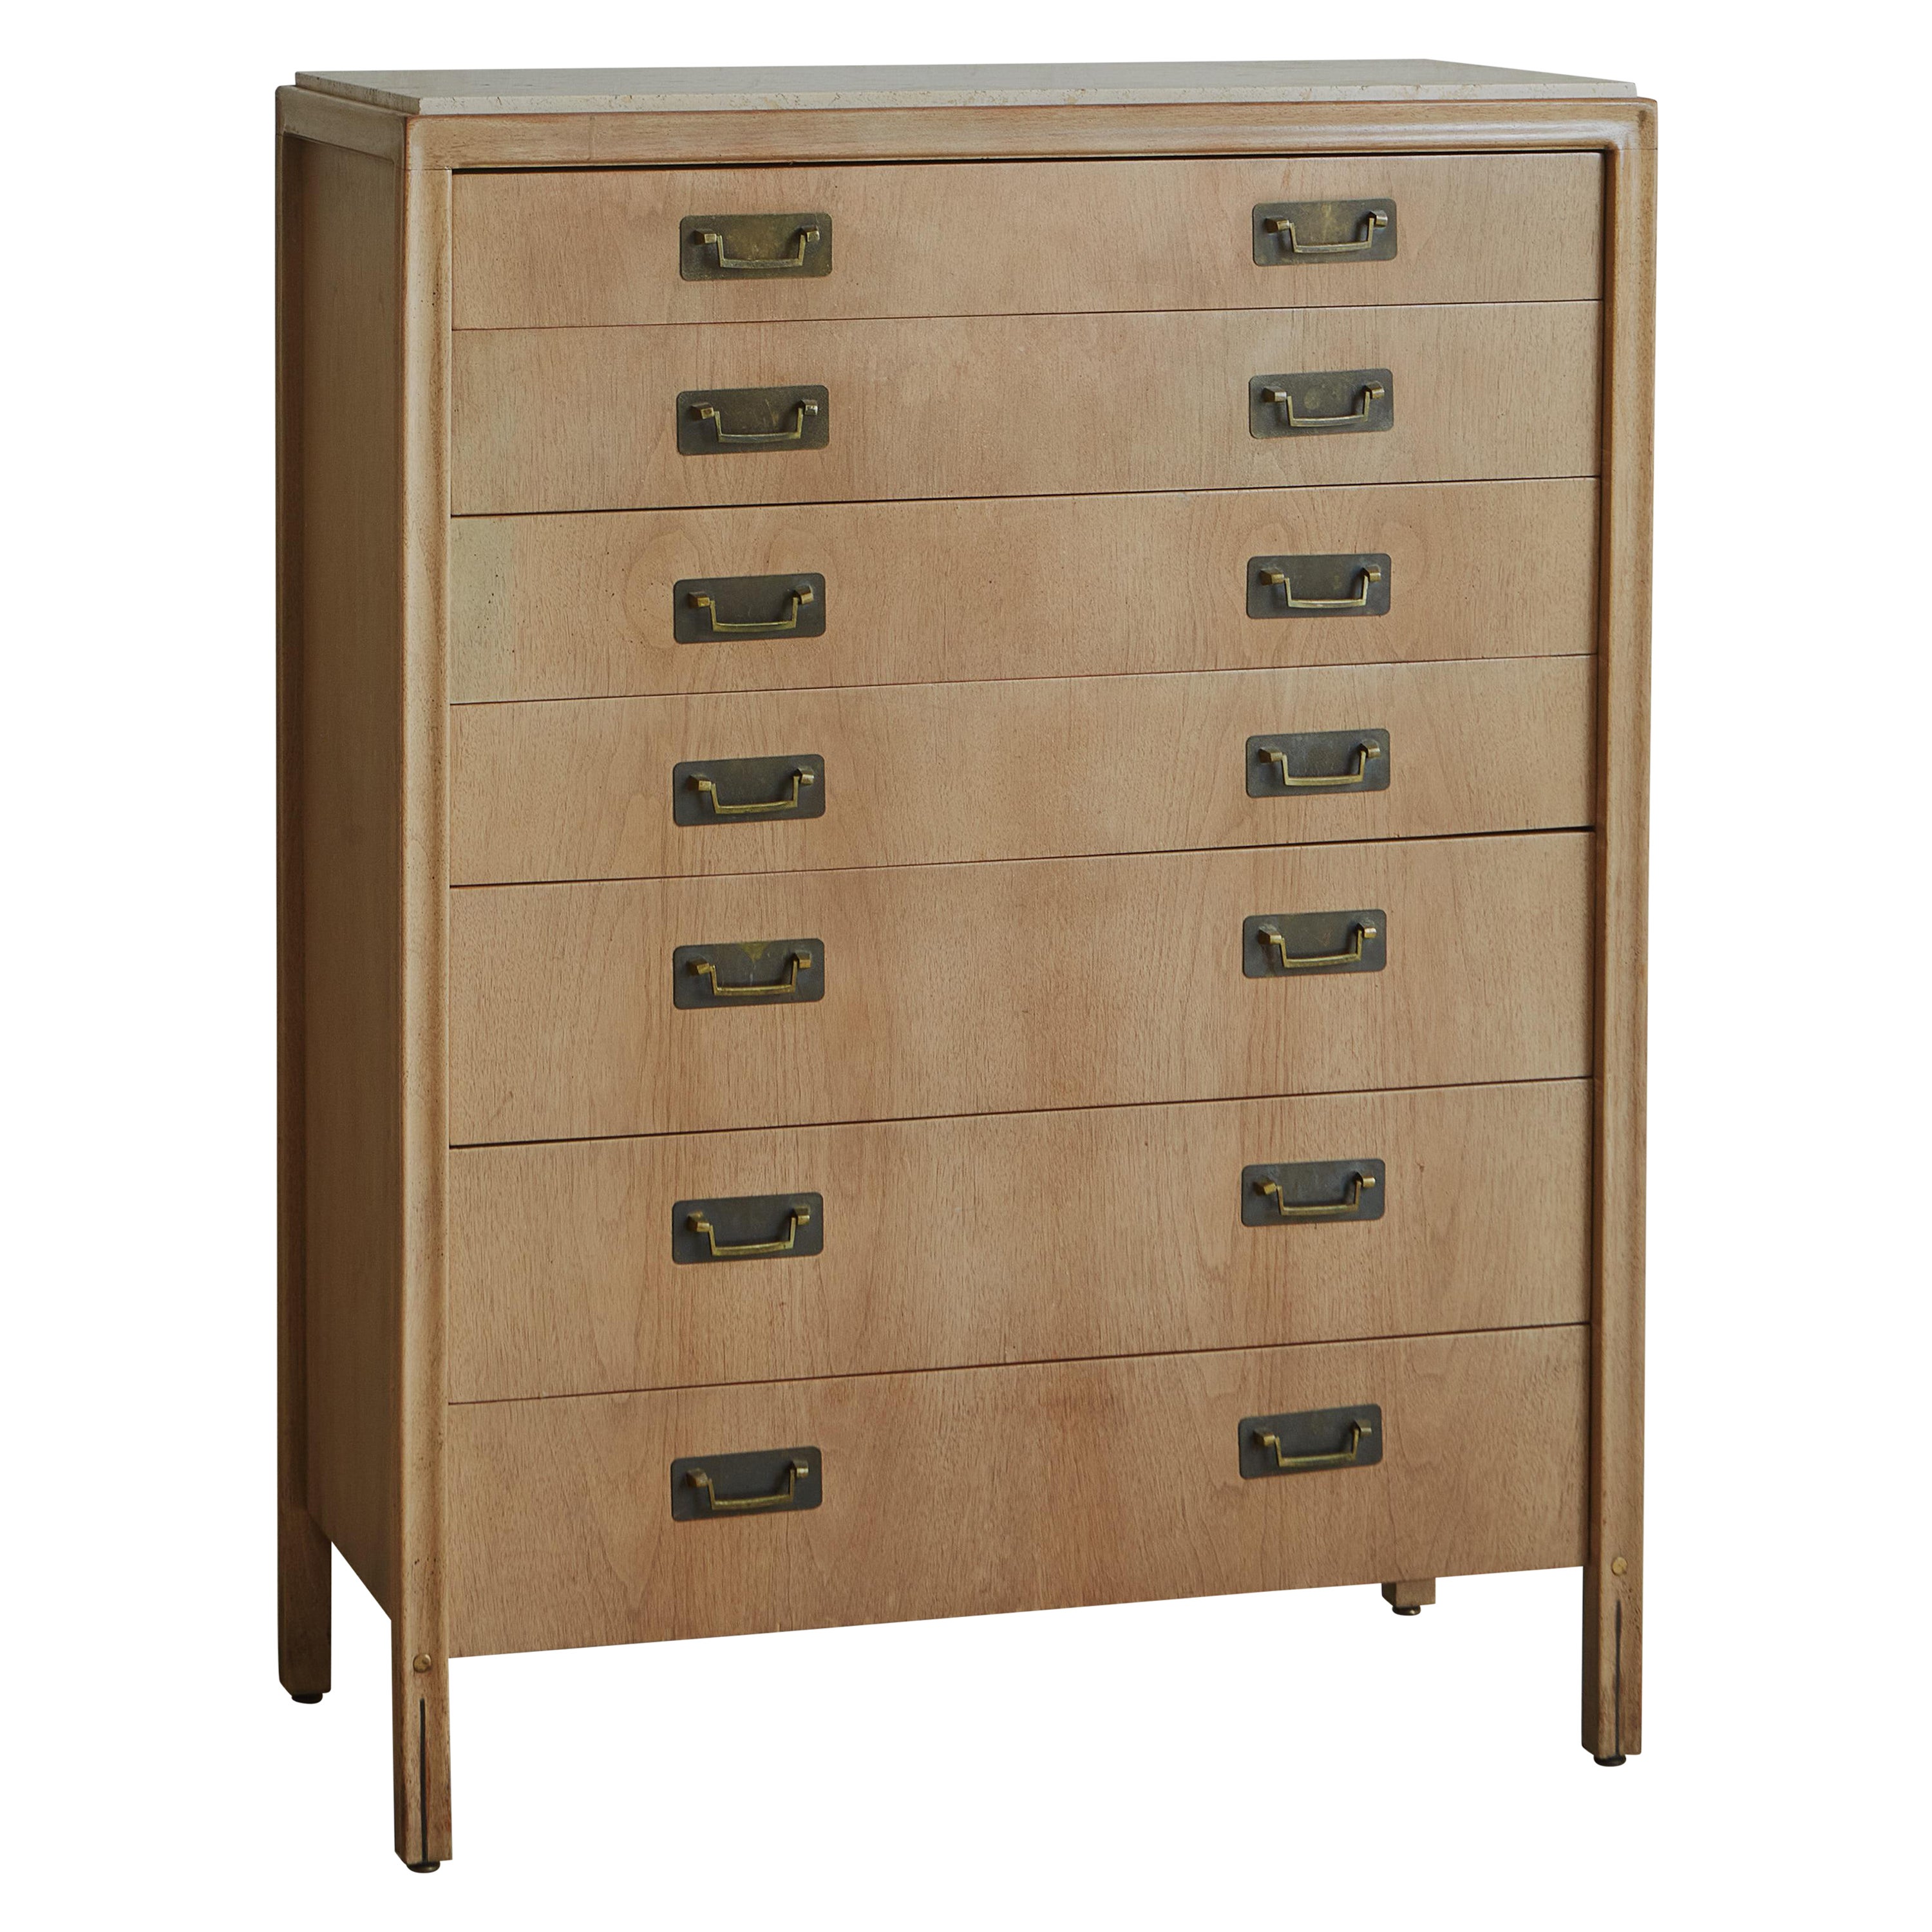 Bleached Walnut Chest of Drawers with Travertine Top by Gerry Zanck for Gregori For Sale